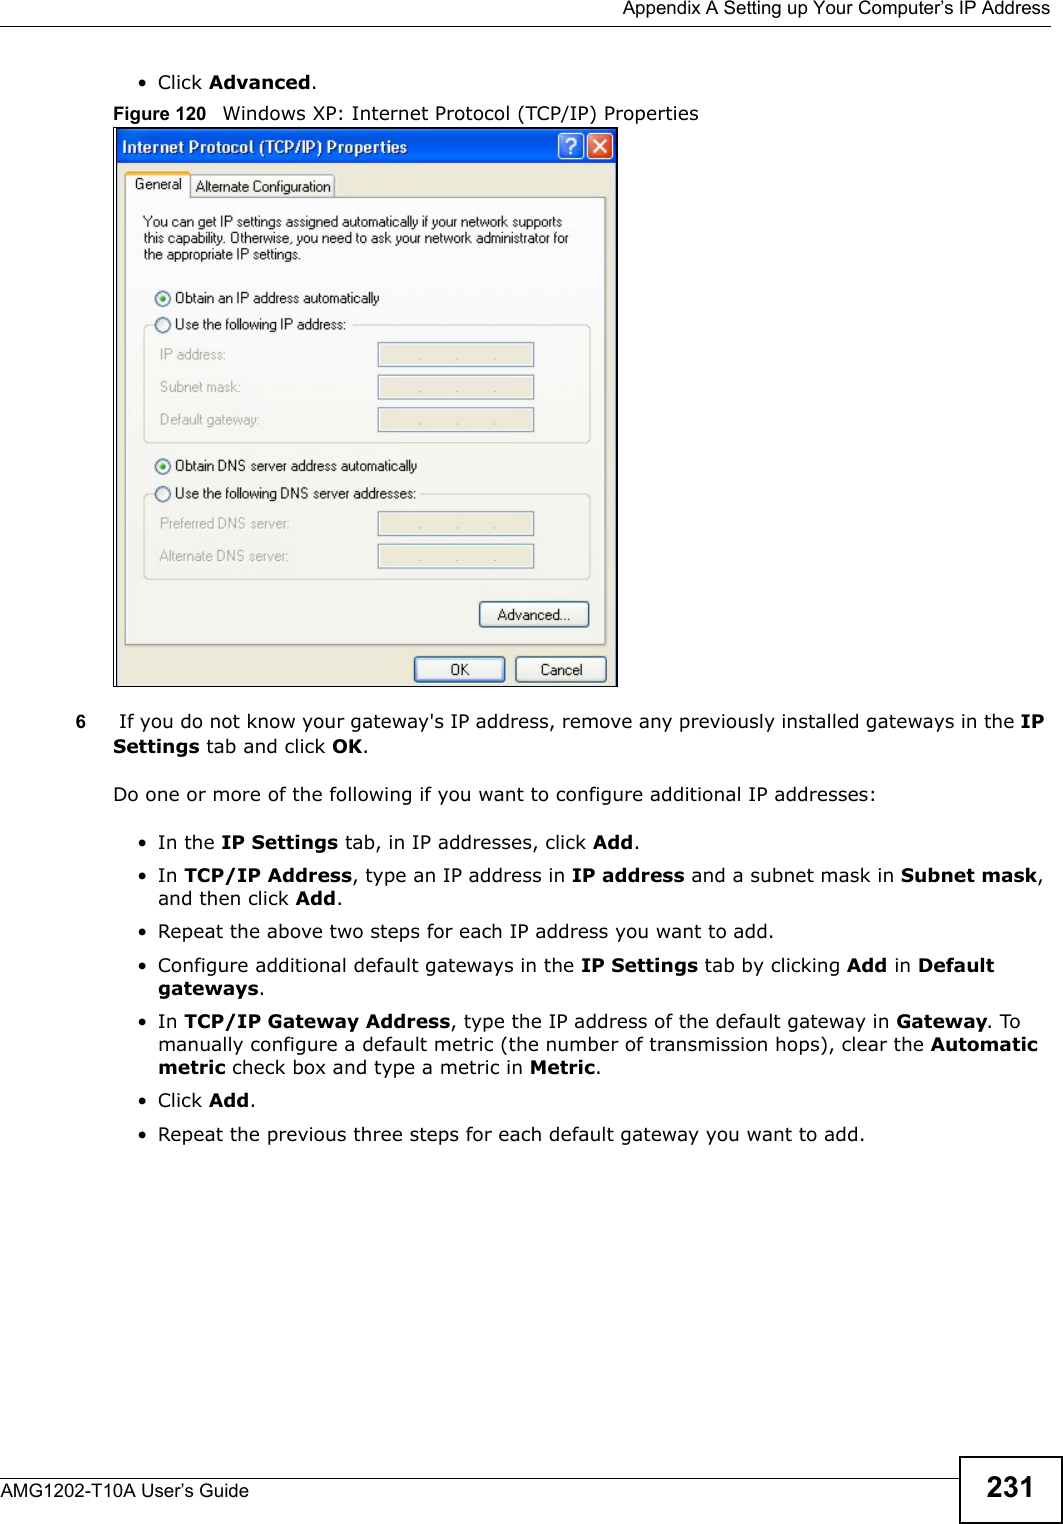  Appendix A Setting up Your Computer’s IP AddressAMG1202-T10A User’s Guide 231• Click Advanced.Figure 120   Windows XP: Internet Protocol (TCP/IP) Properties6 If you do not know your gateway&apos;s IP address, remove any previously installed gateways in the IP Settings tab and click OK.Do one or more of the following if you want to configure additional IP addresses:•In the IP Settings tab, in IP addresses, click Add.•In TCP/IP Address, type an IP address in IP address and a subnet mask in Subnet mask, and then click Add.• Repeat the above two steps for each IP address you want to add.• Configure additional default gateways in the IP Settings tab by clicking Add in Default gateways.•In TCP/IP Gateway Address, type the IP address of the default gateway in Gateway. To manually configure a default metric (the number of transmission hops), clear the Automatic metric check box and type a metric in Metric.• Click Add. • Repeat the previous three steps for each default gateway you want to add.